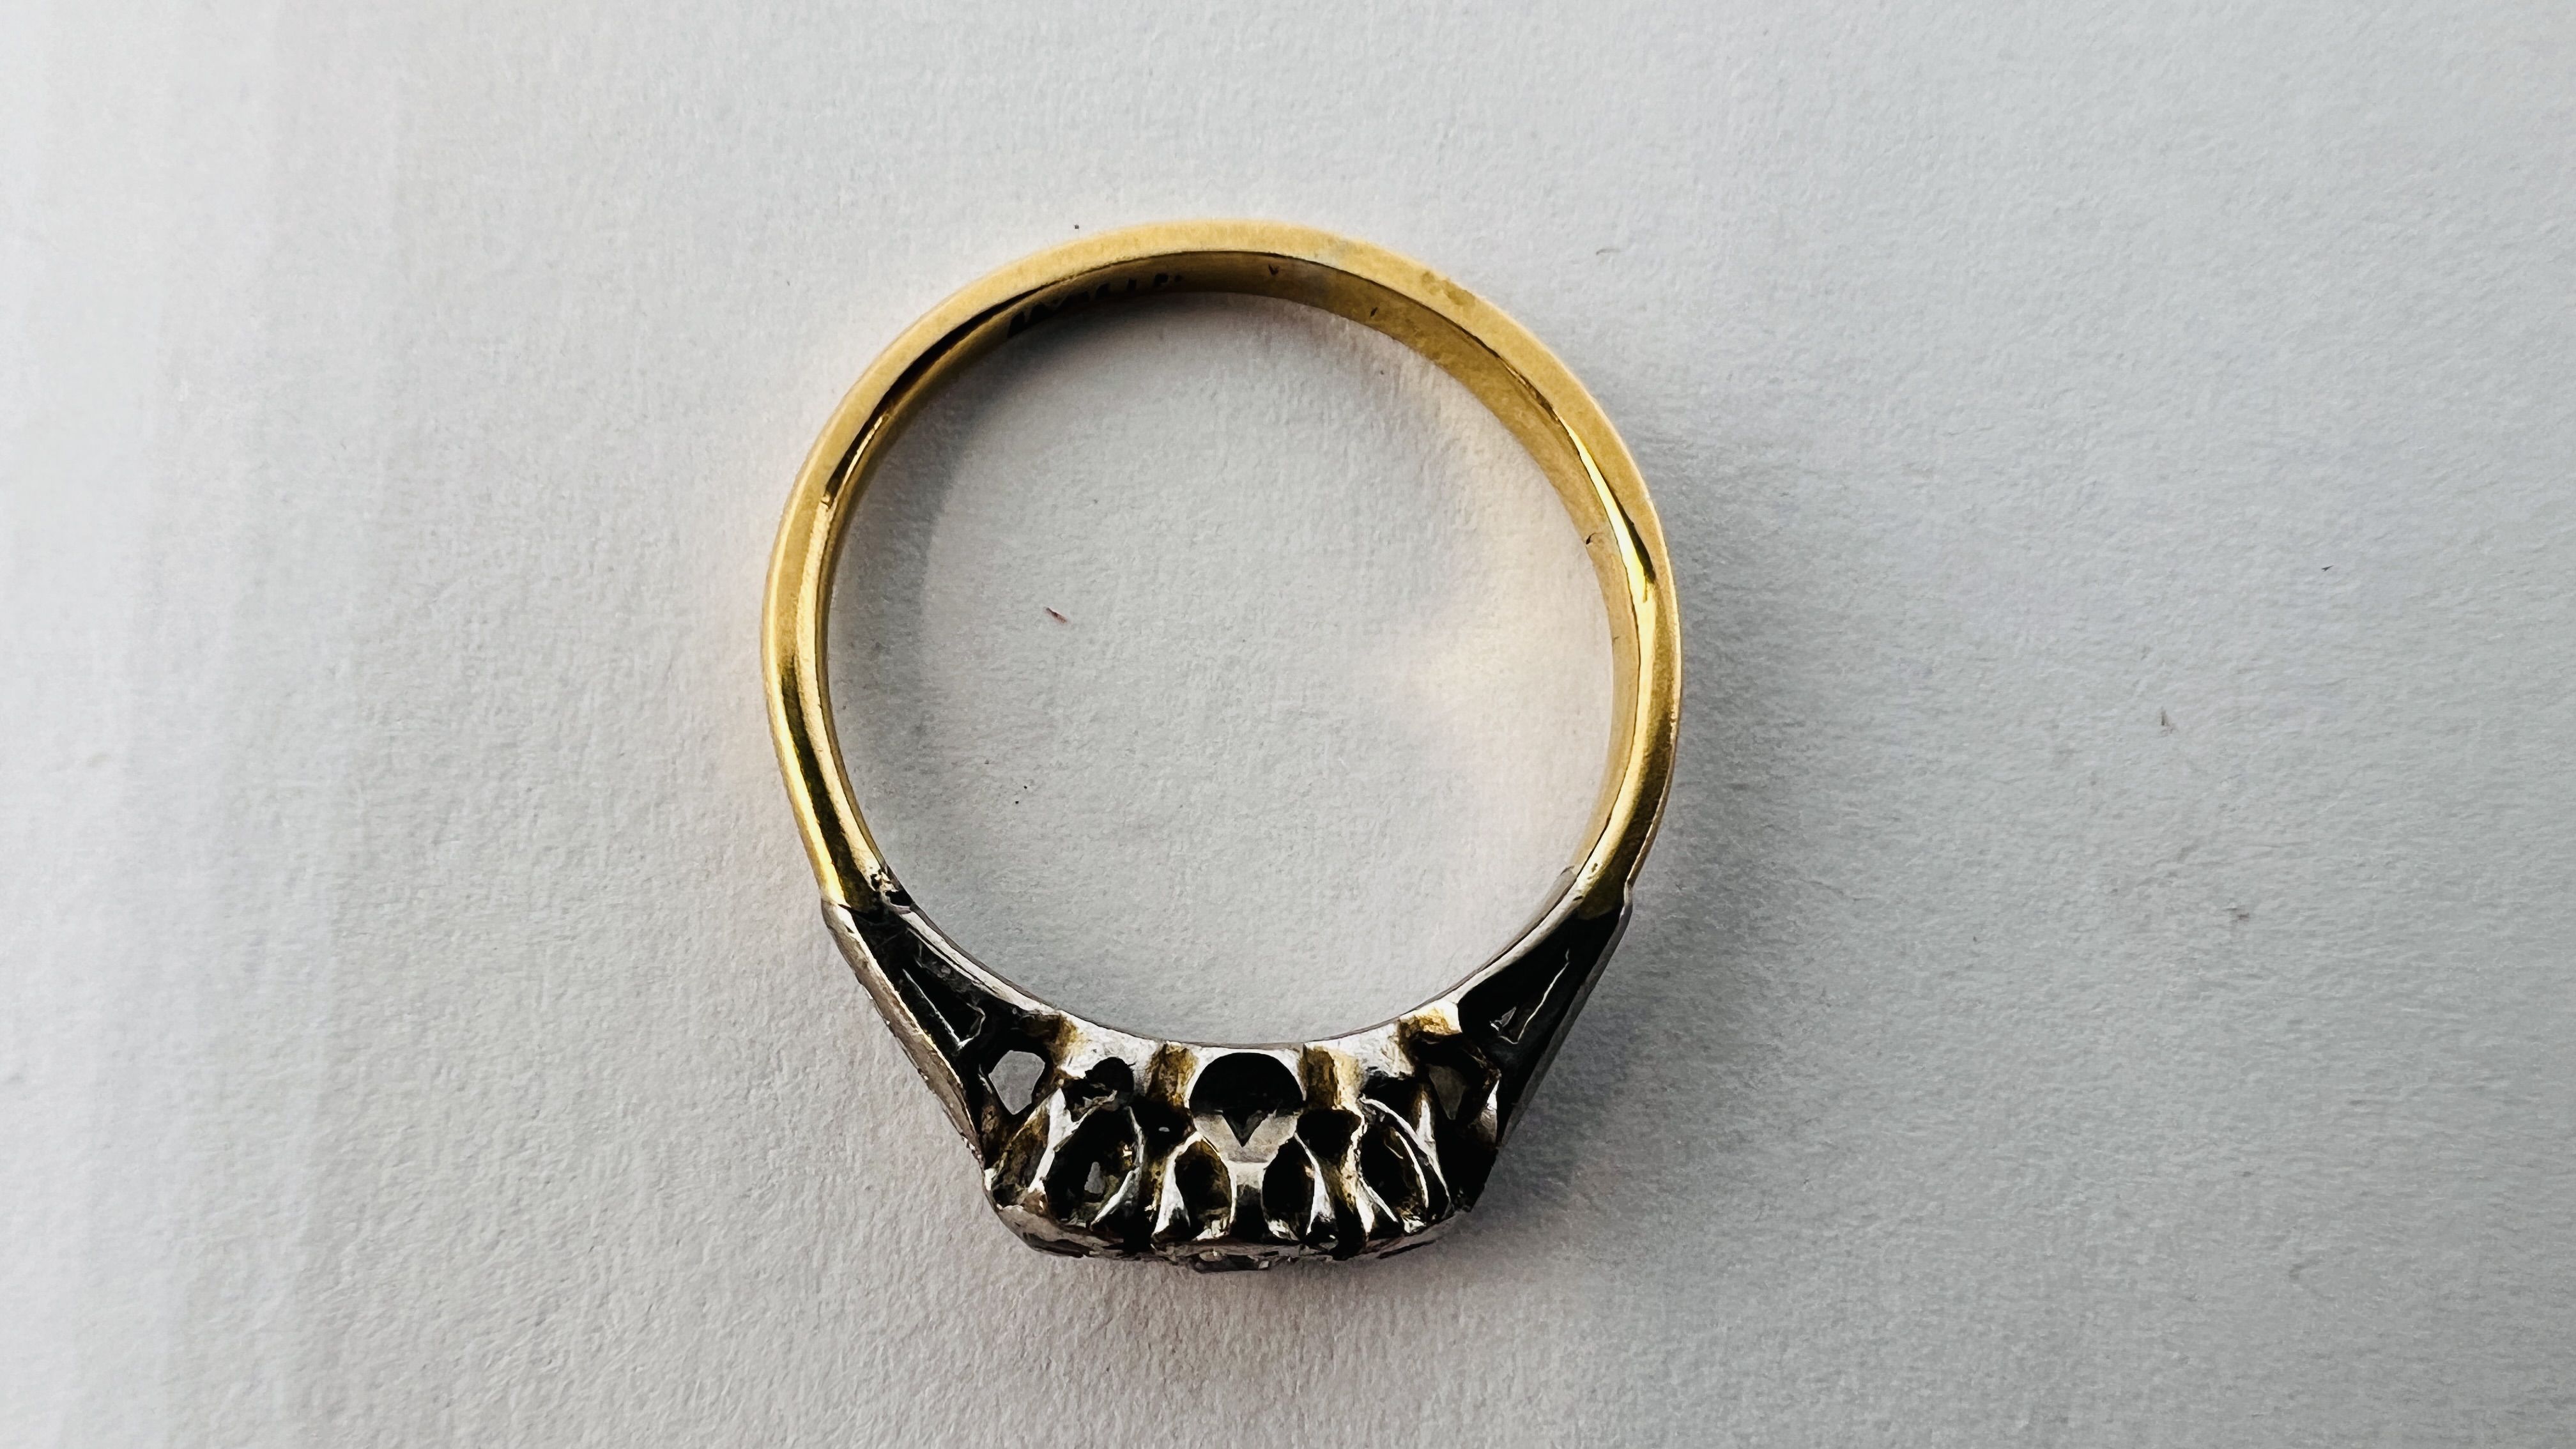 A YELLOW METAL 3 STONE DIAMOND RING (RUBBED MARKS). - Image 3 of 9